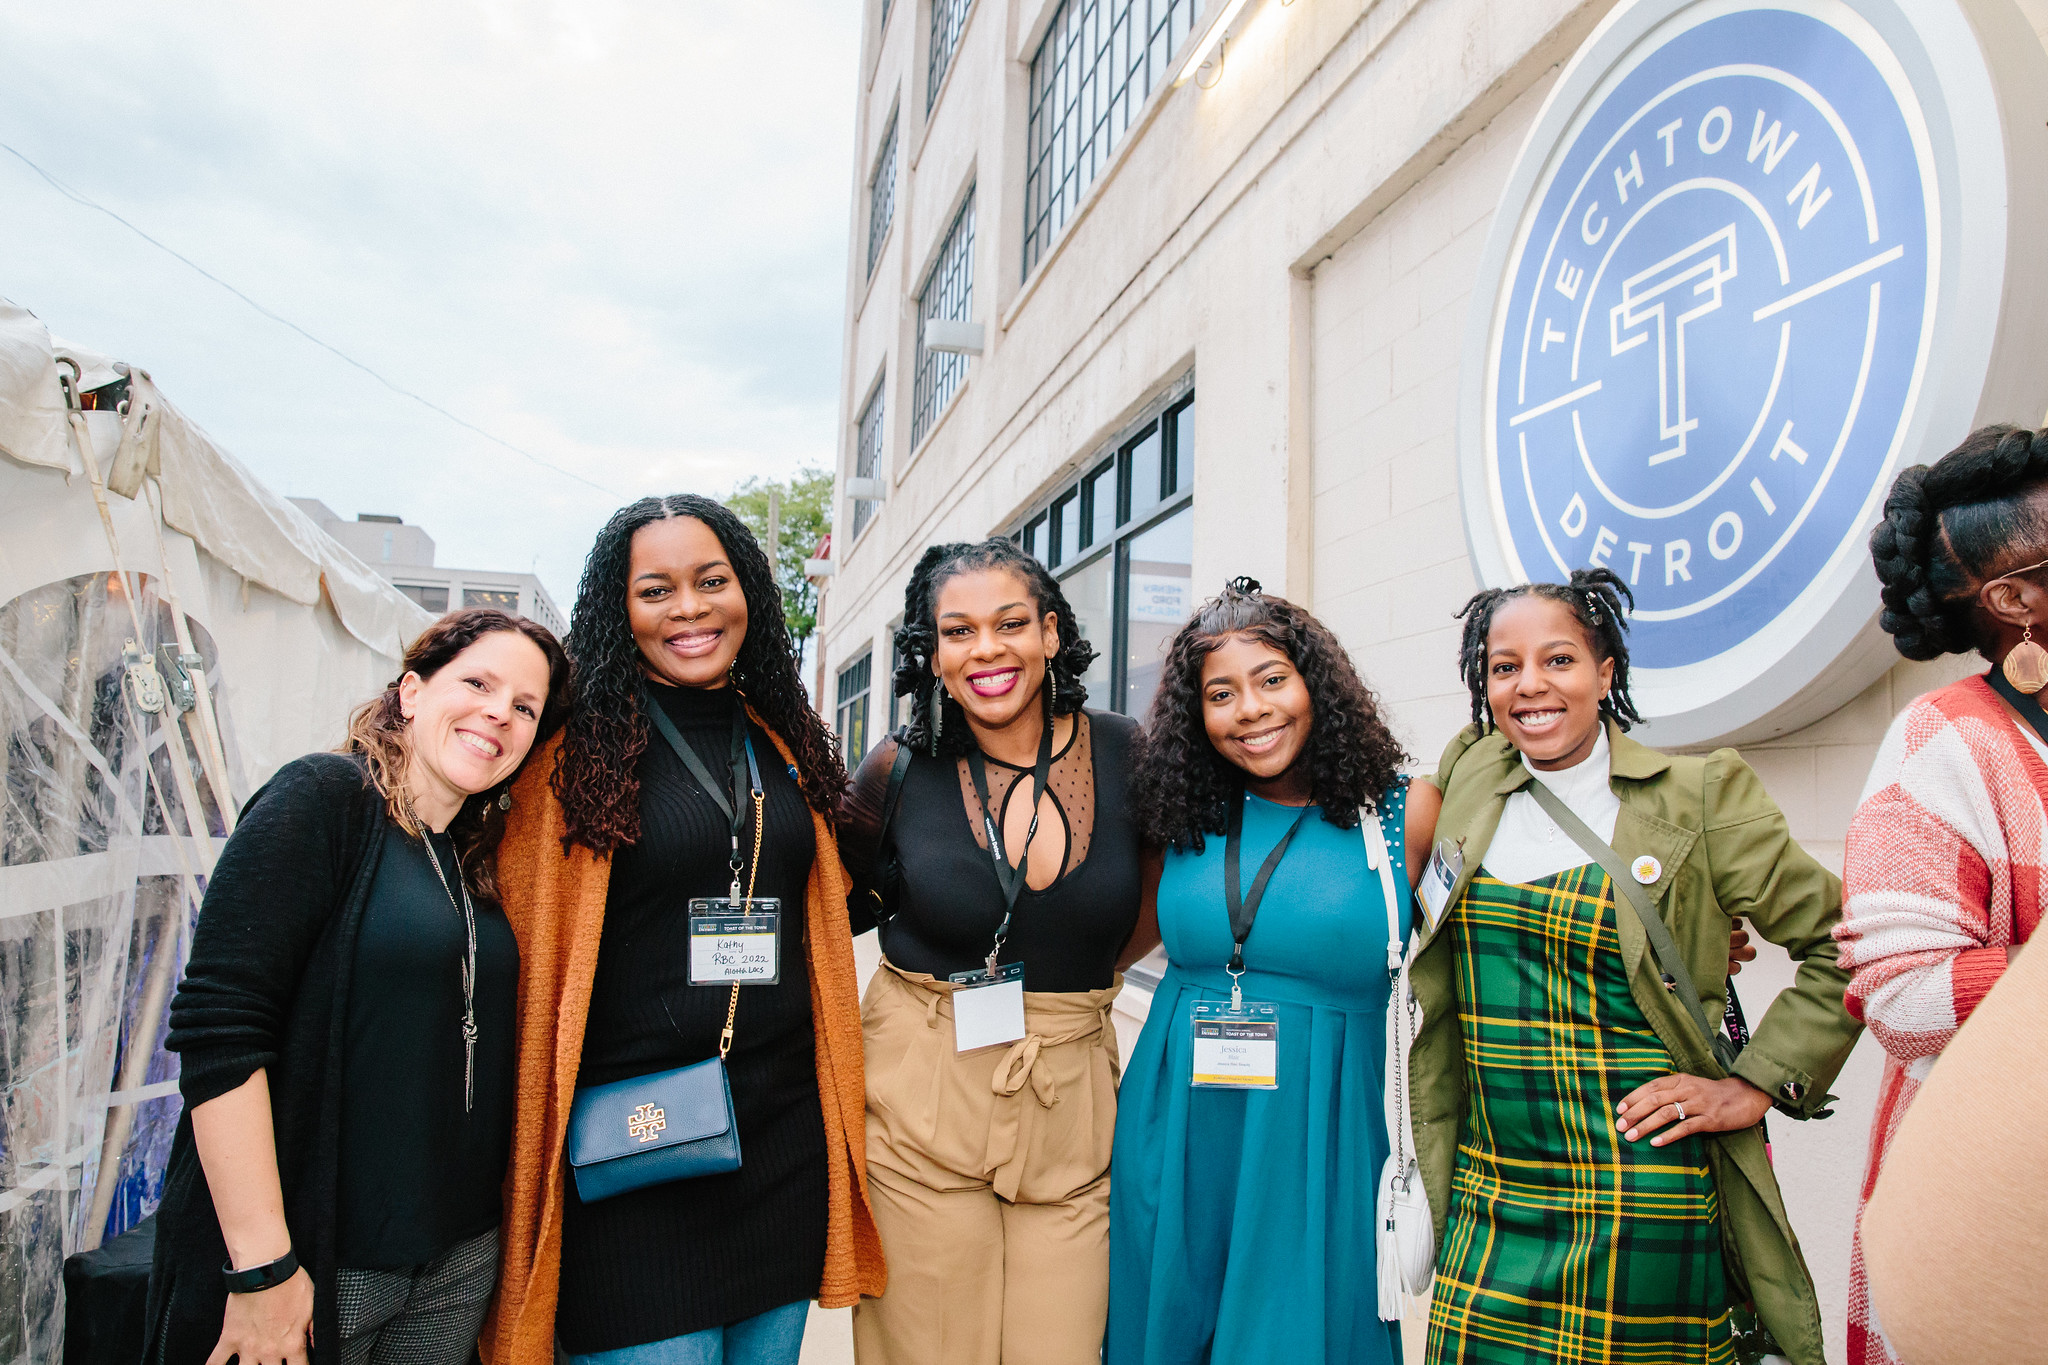  Christina Devlin (left), retail strategist at TechTown Detroit, gathers with program alumni and local small business owners at the 2022 Toast of the Town.